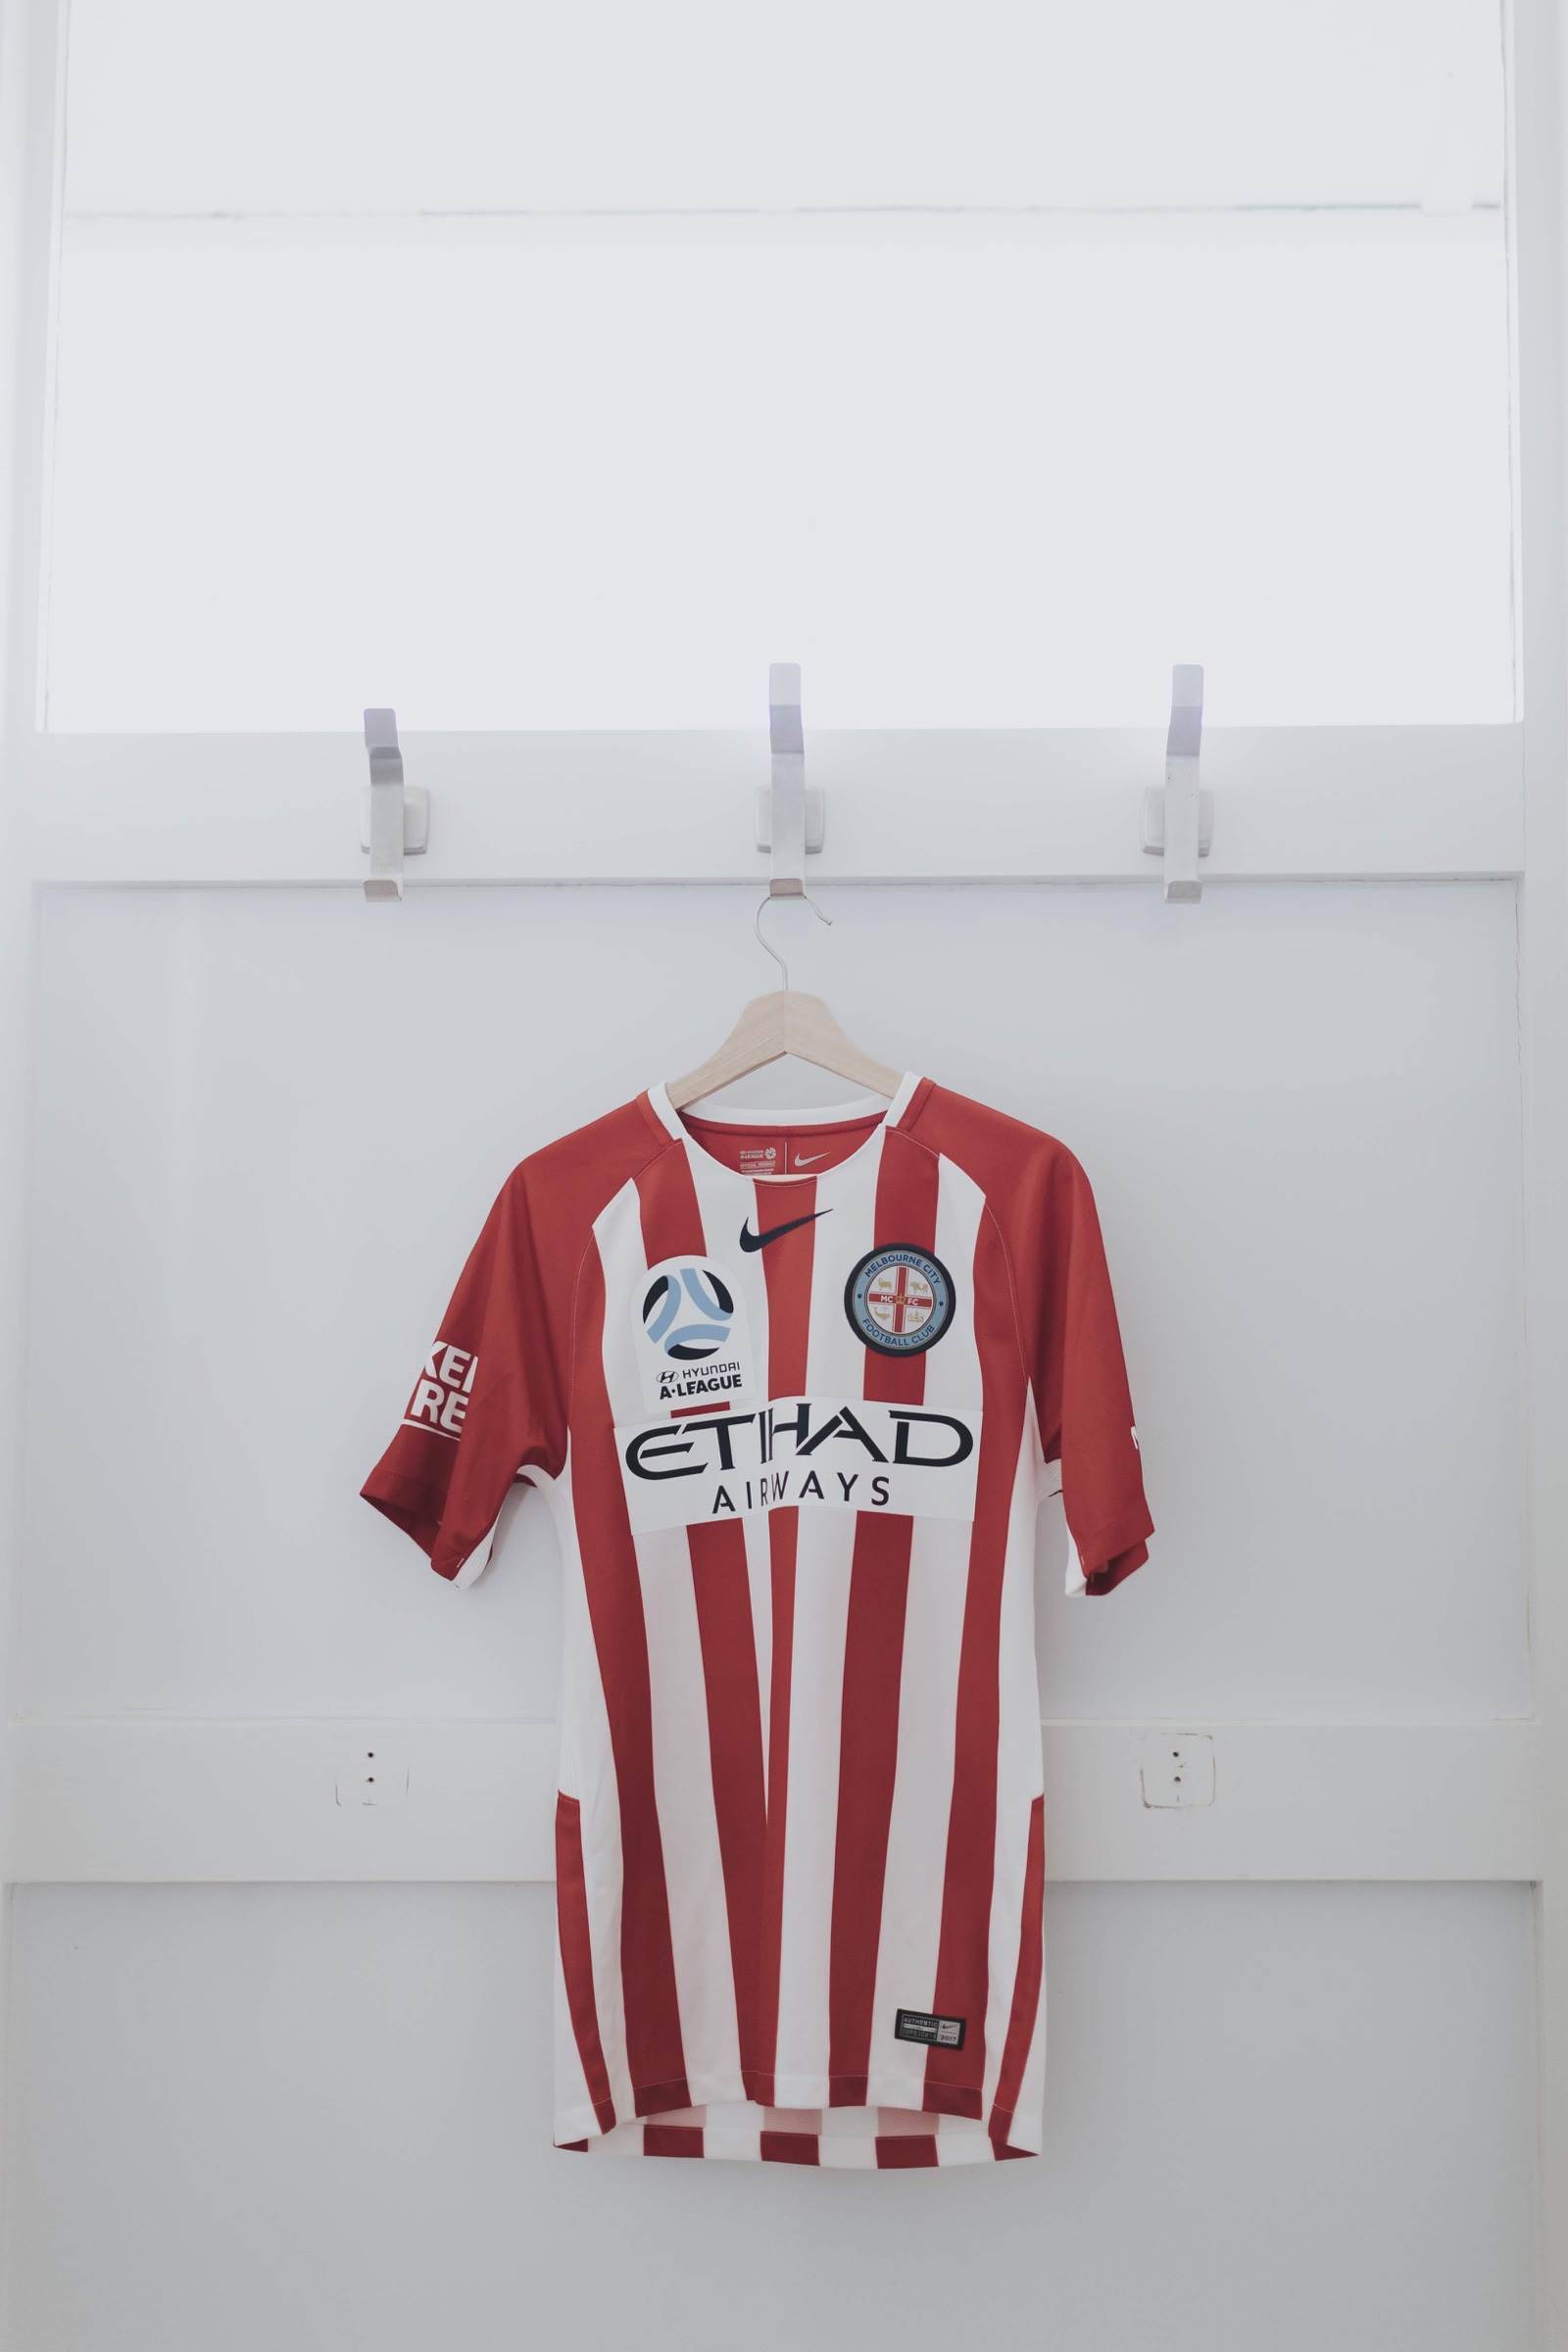 Revealed! Melbourne City's new kit - pic special - FTBL | The home of football in Australia